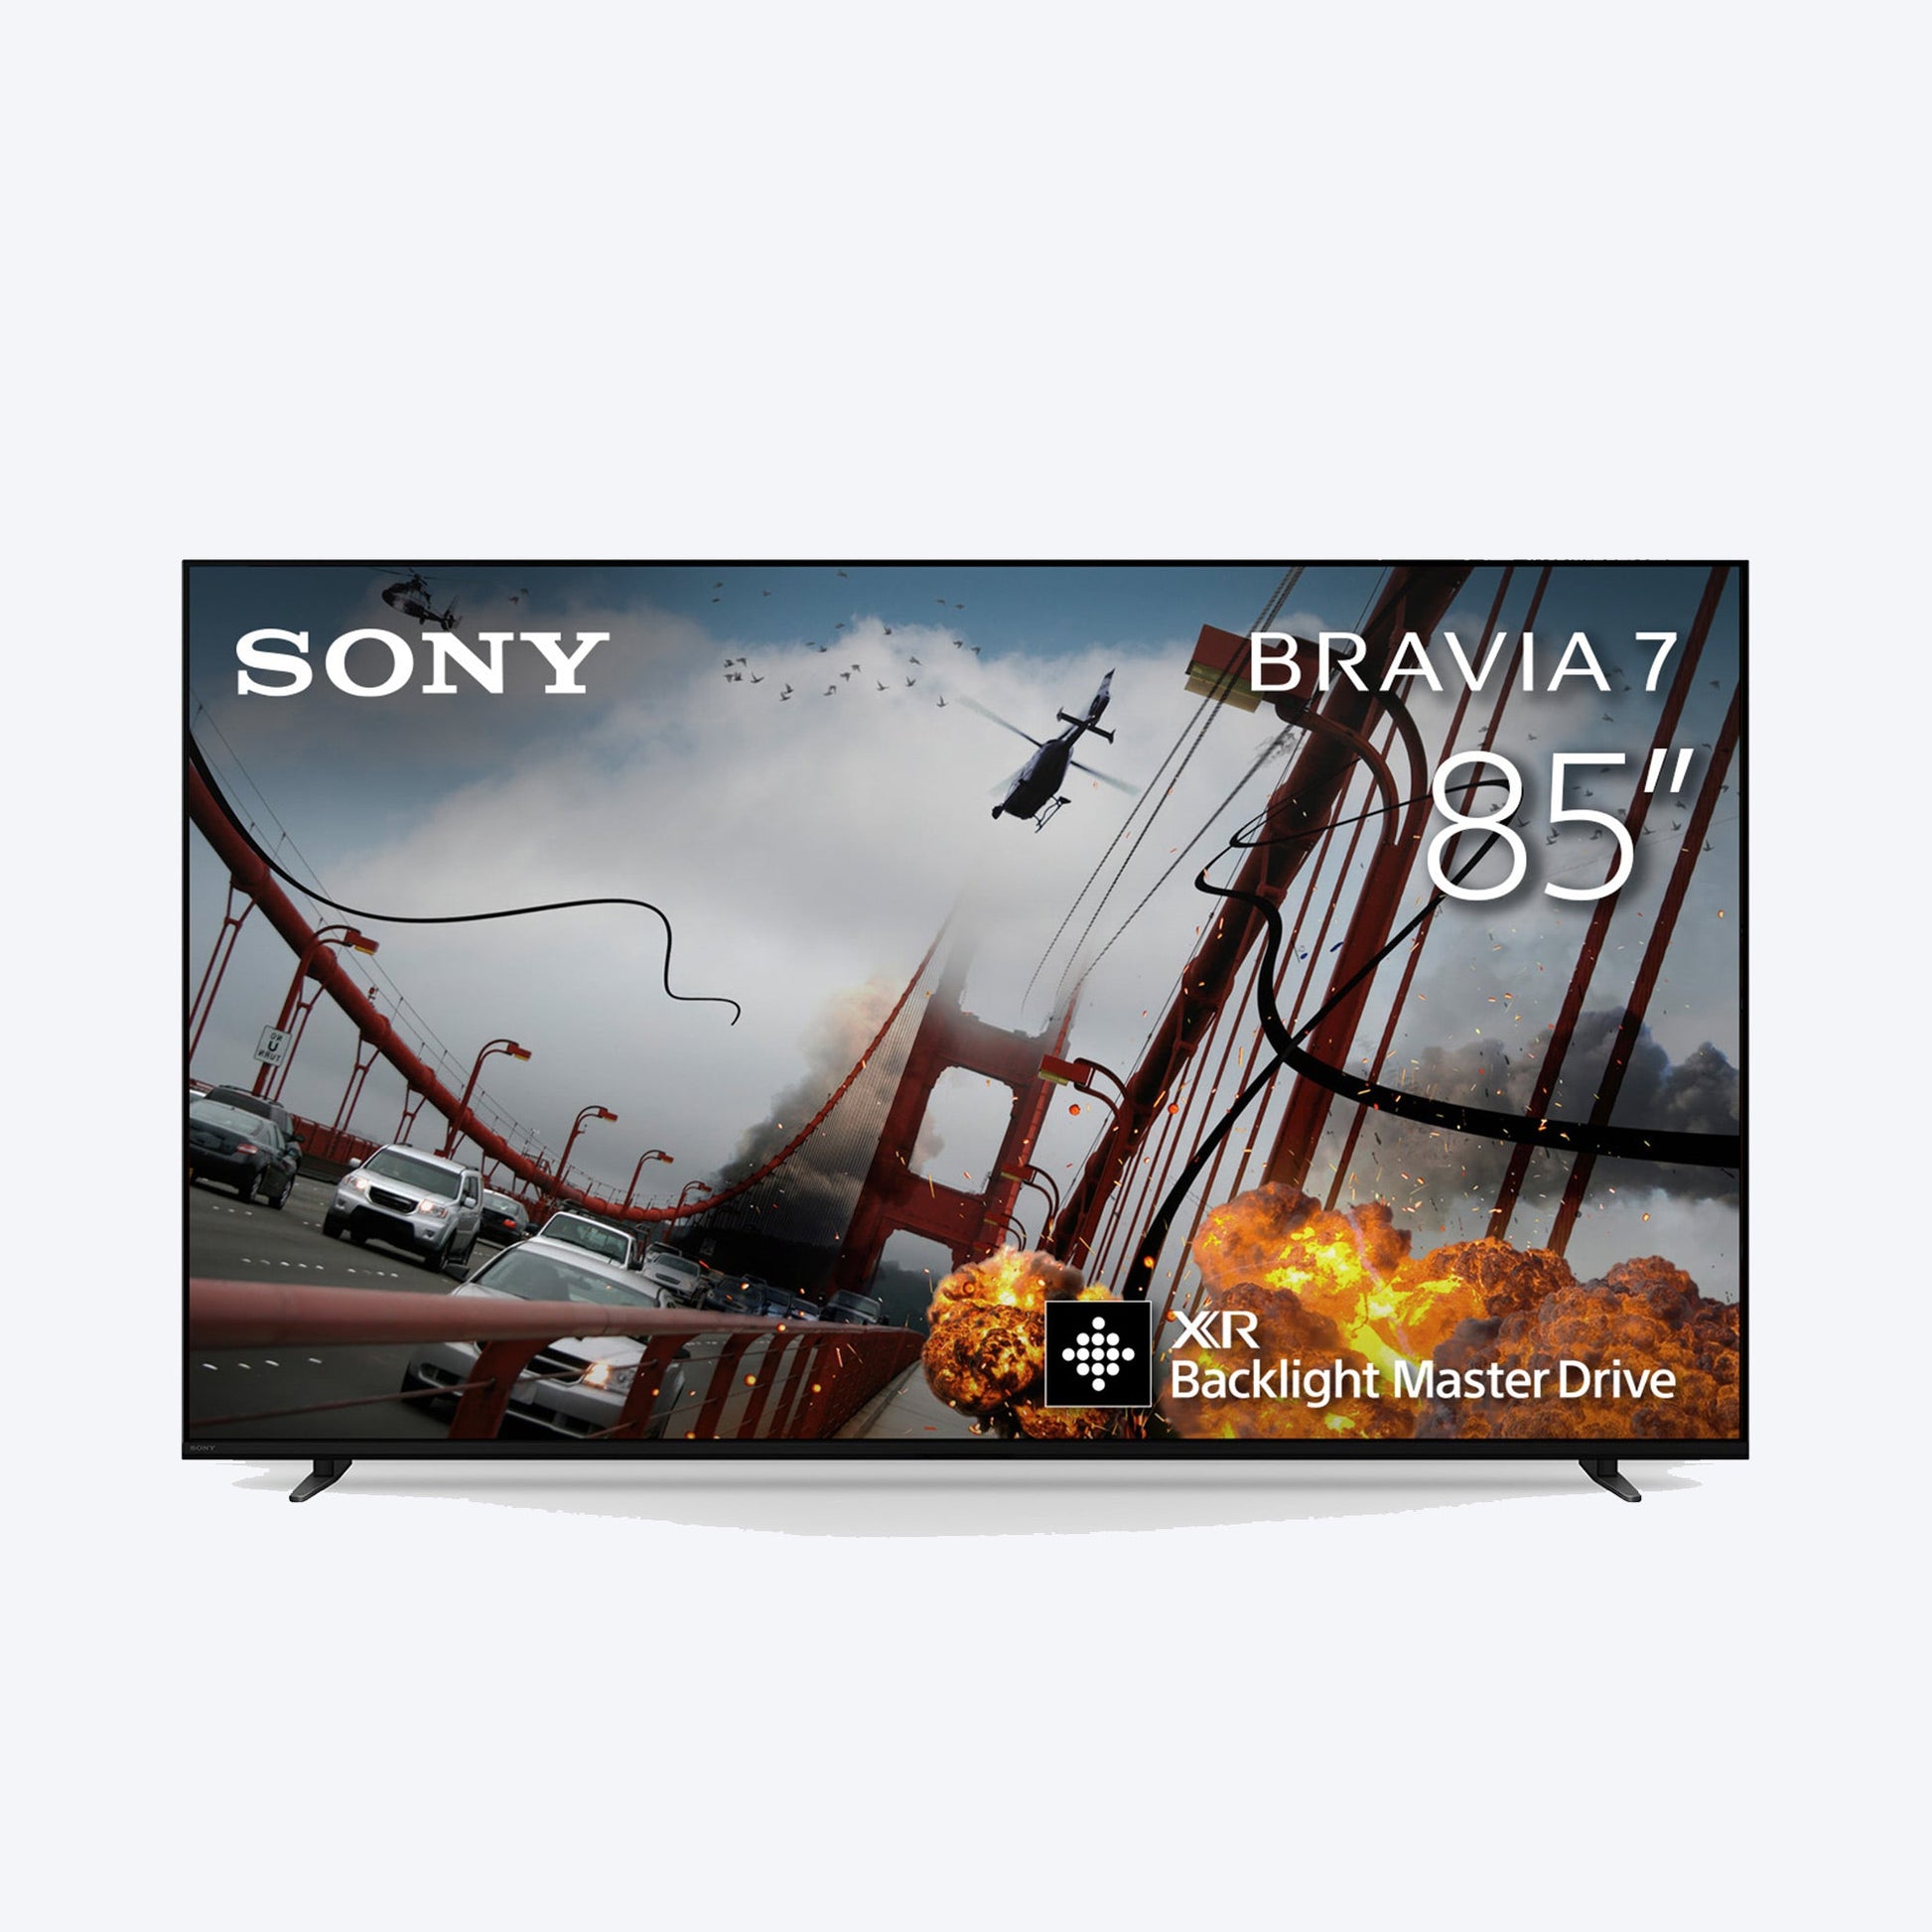 Sony | BRAVIA 7| 85 Inch |XR BACKLIGHT MASTER DRIVE TV | Perfectly balanced for movies, PS5 gaming & sports|4K HDR Smart TV (Google TV) | 2024 Model